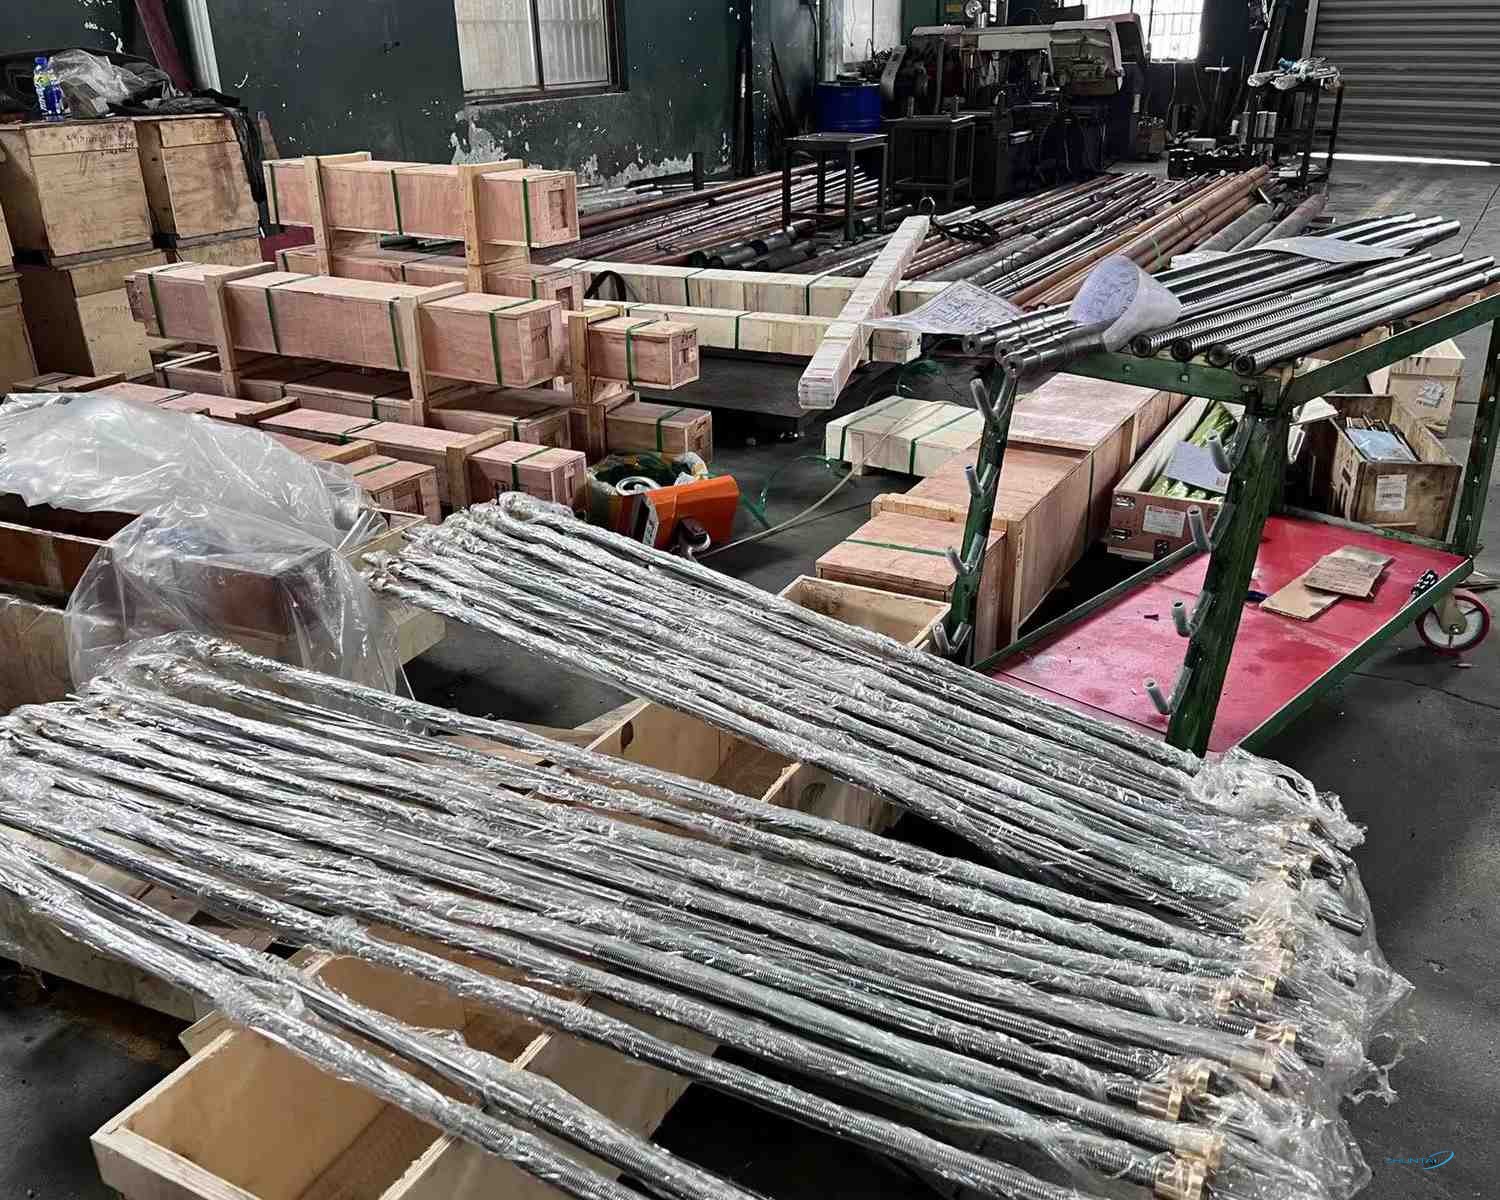 Daily Delivery | Shuntai Were Sent To Russia